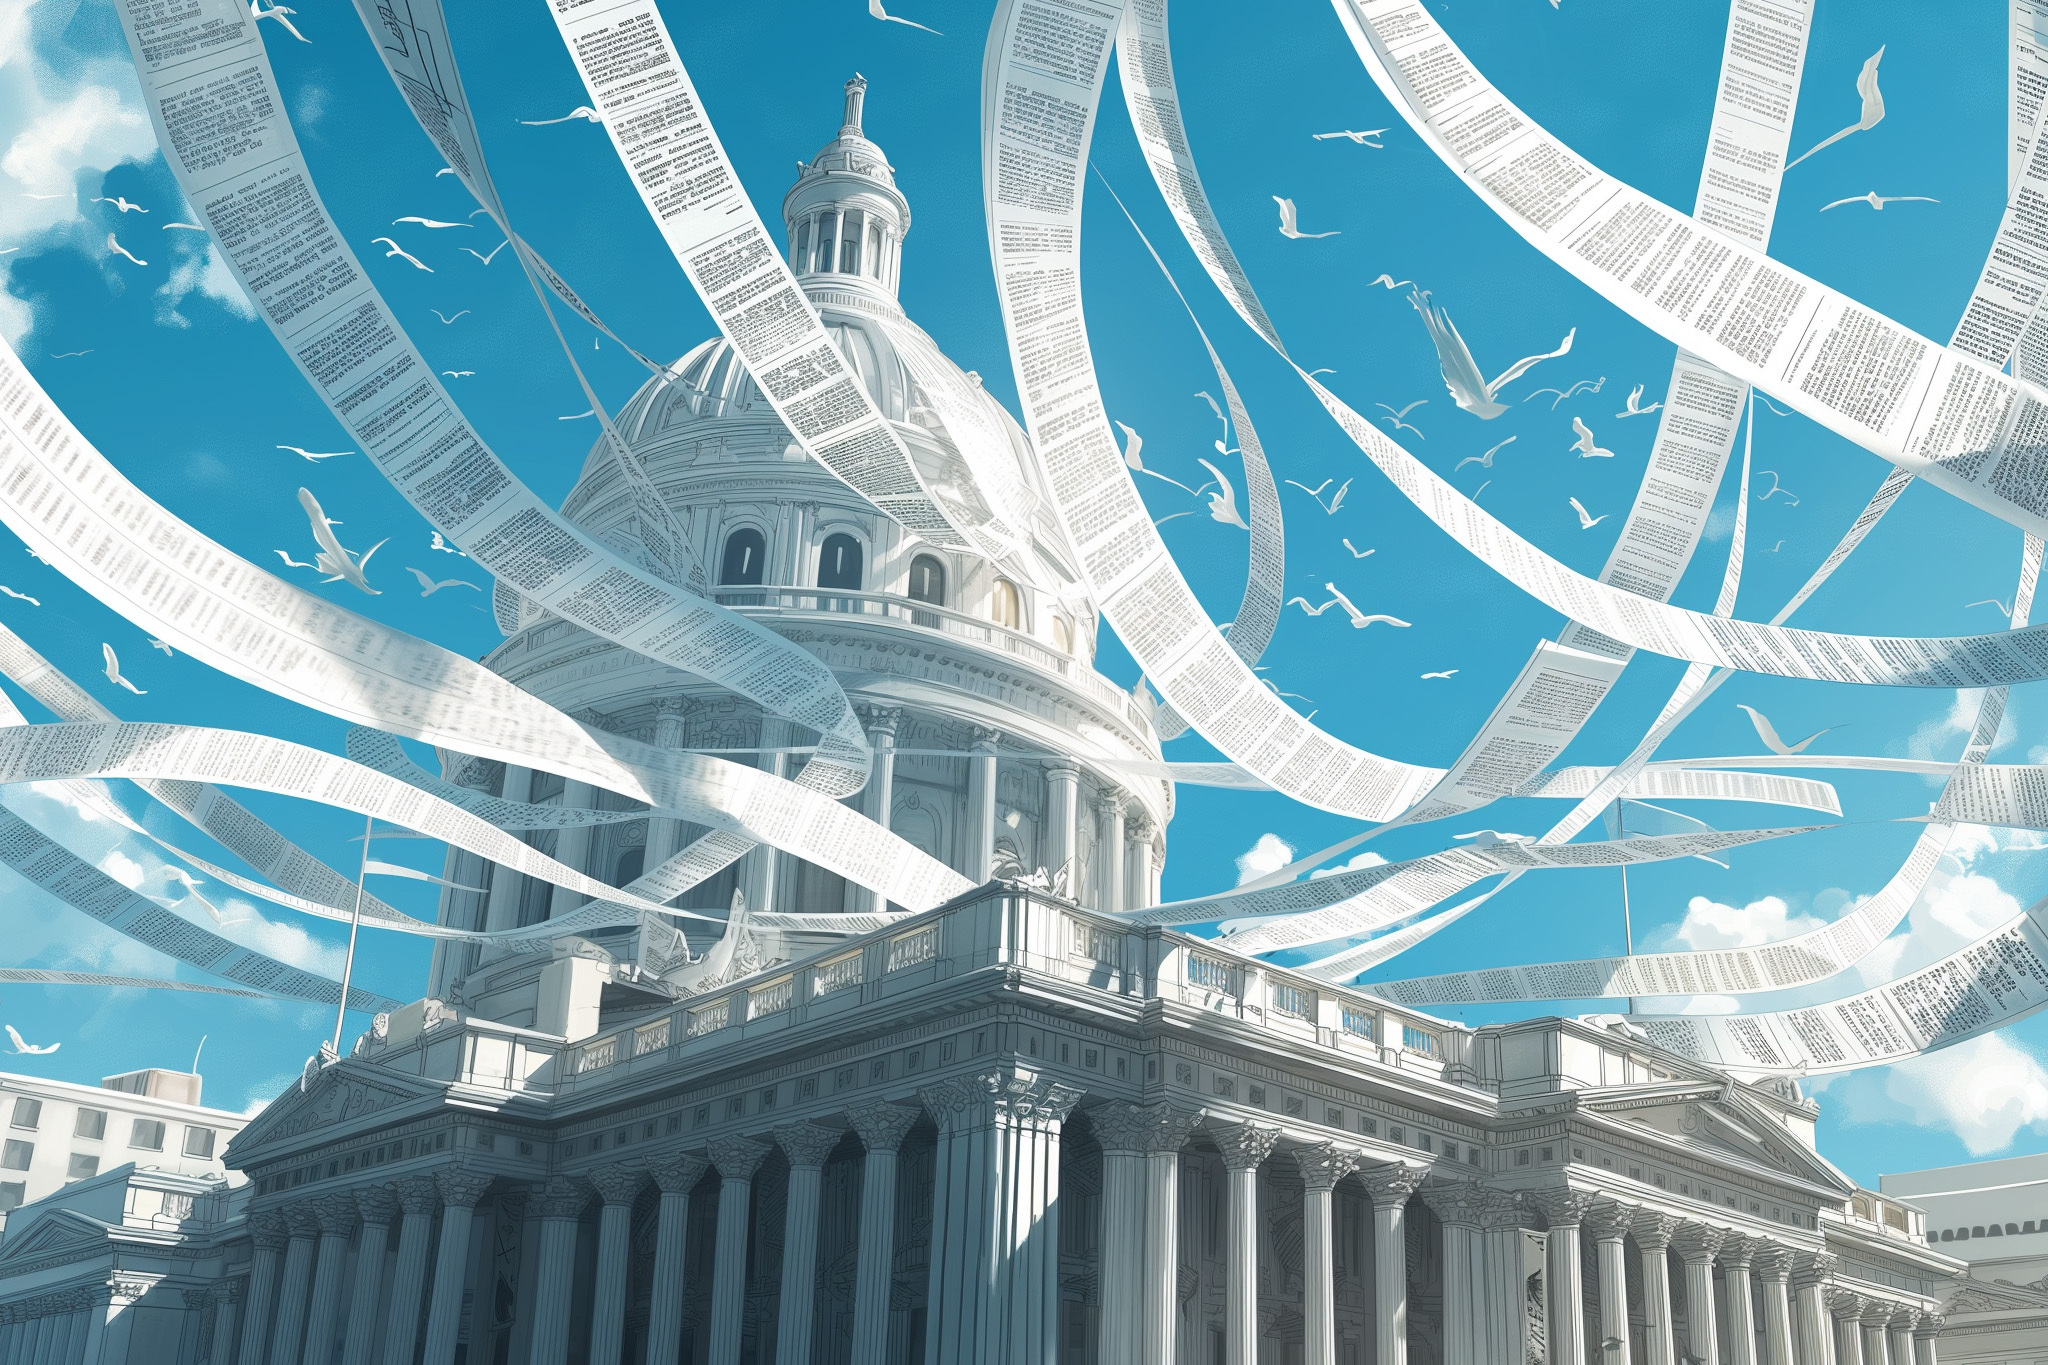 A neoclassical building with a dome is surrounded by swirling newspaper strips and seagulls under a blue sky.